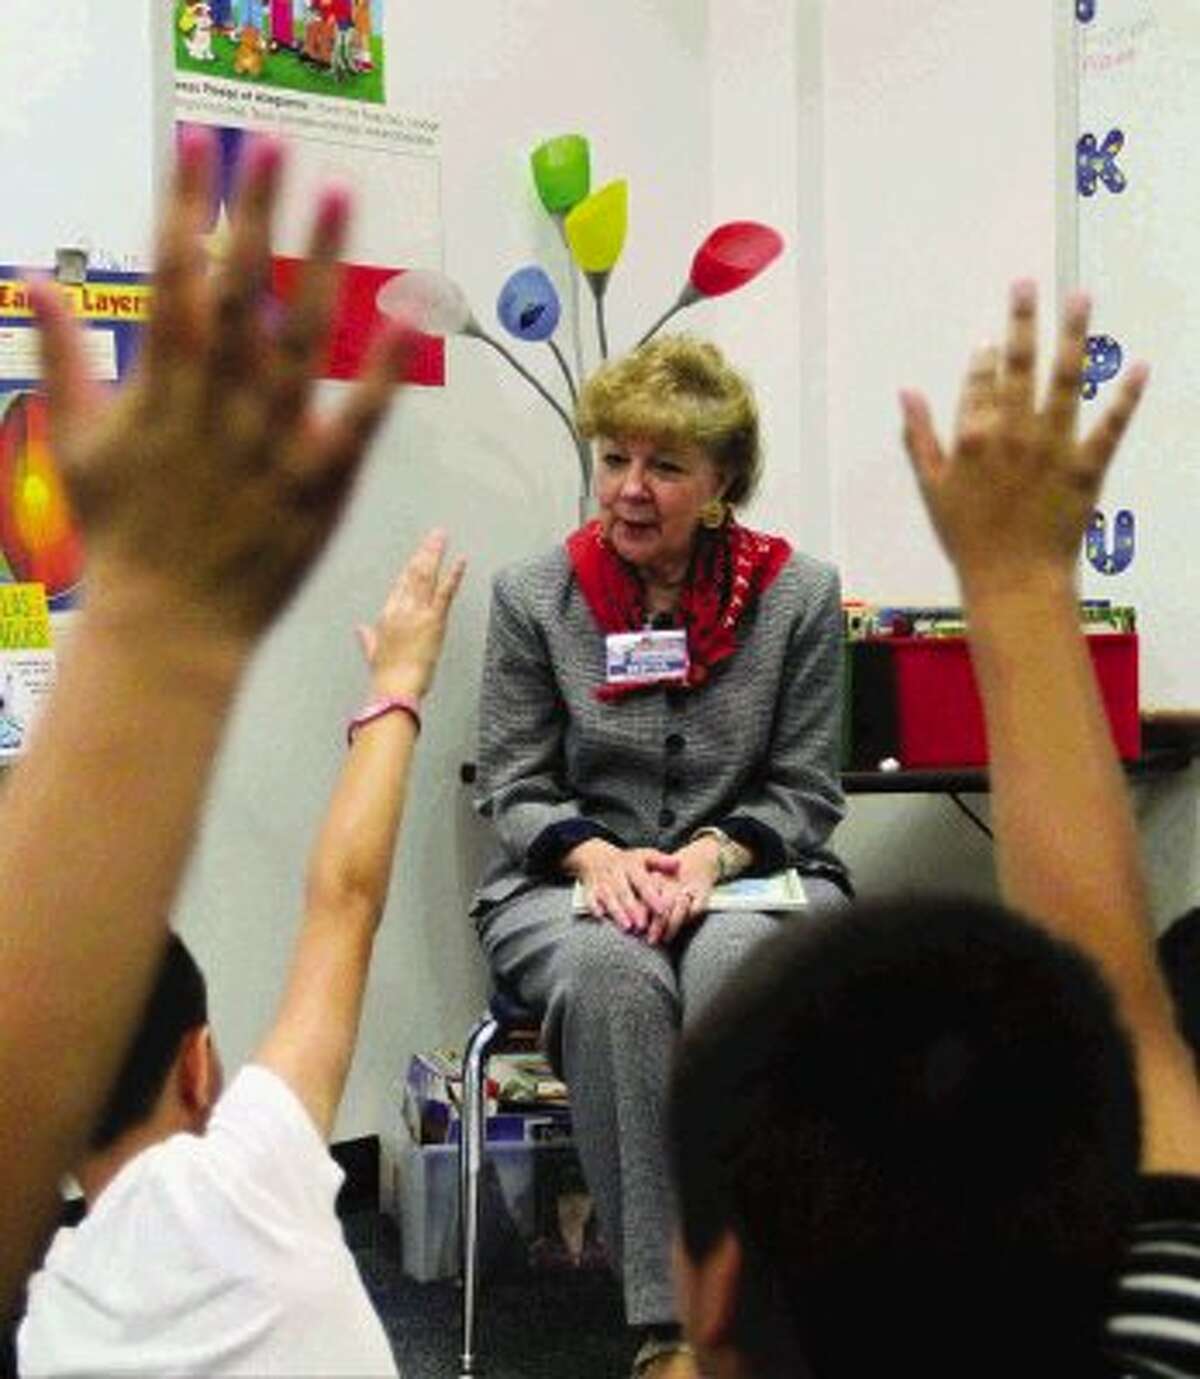 State District Judge Kathleen Hamilton asks a questions to Reaves Elementary fourth graders at as part of Conroe ISD's "Read for a Better Life" program Wednesday. The program's goal is for adults within the Conroe ISD community to commit to reading to every students for thirty minutes each day.